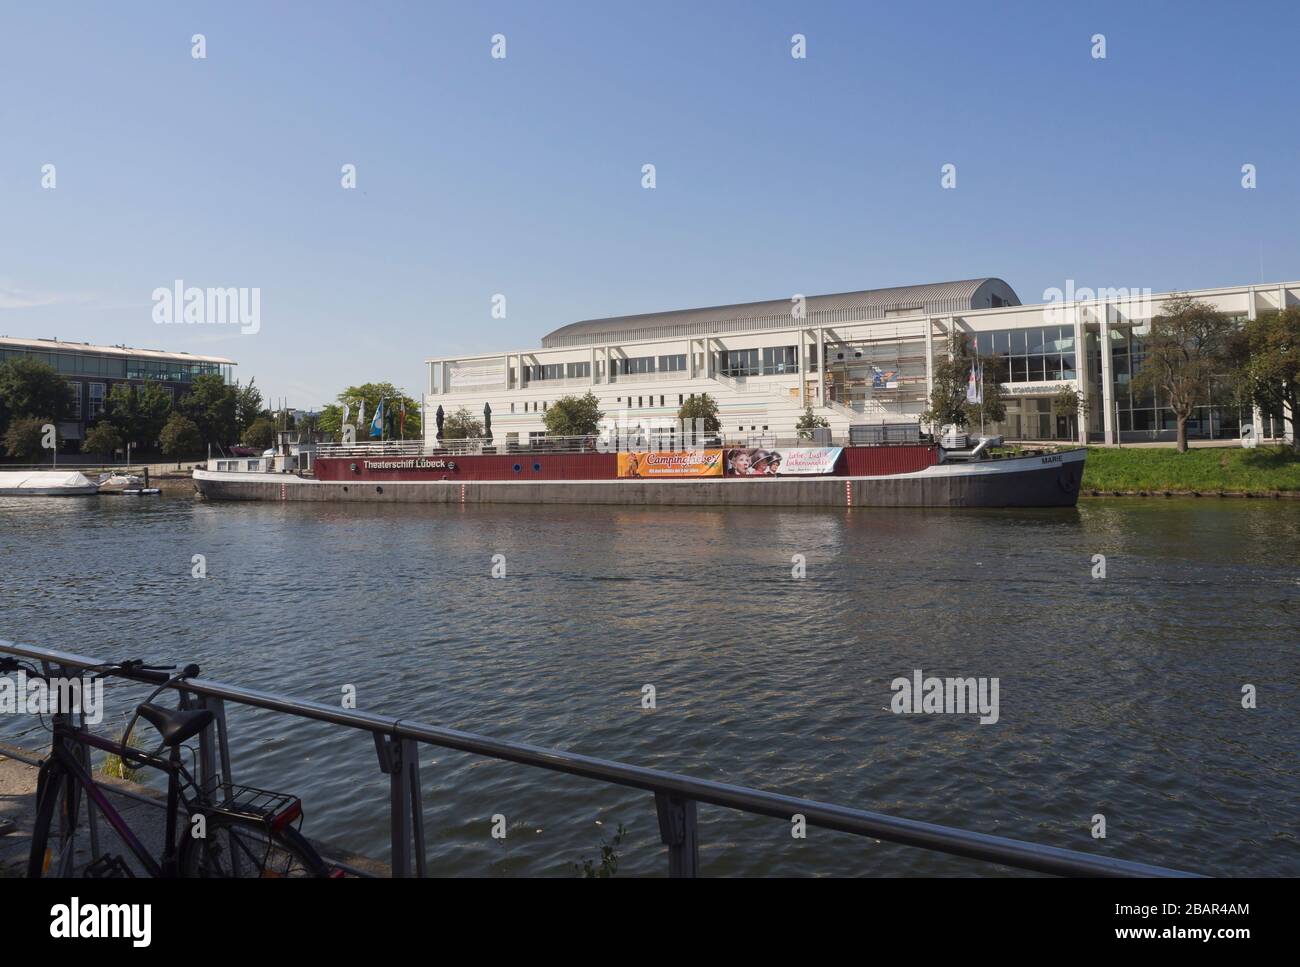 The Music- and congress hall behind the  theater-boat, Theaterschiff in Lübeck Germany Stock Photo